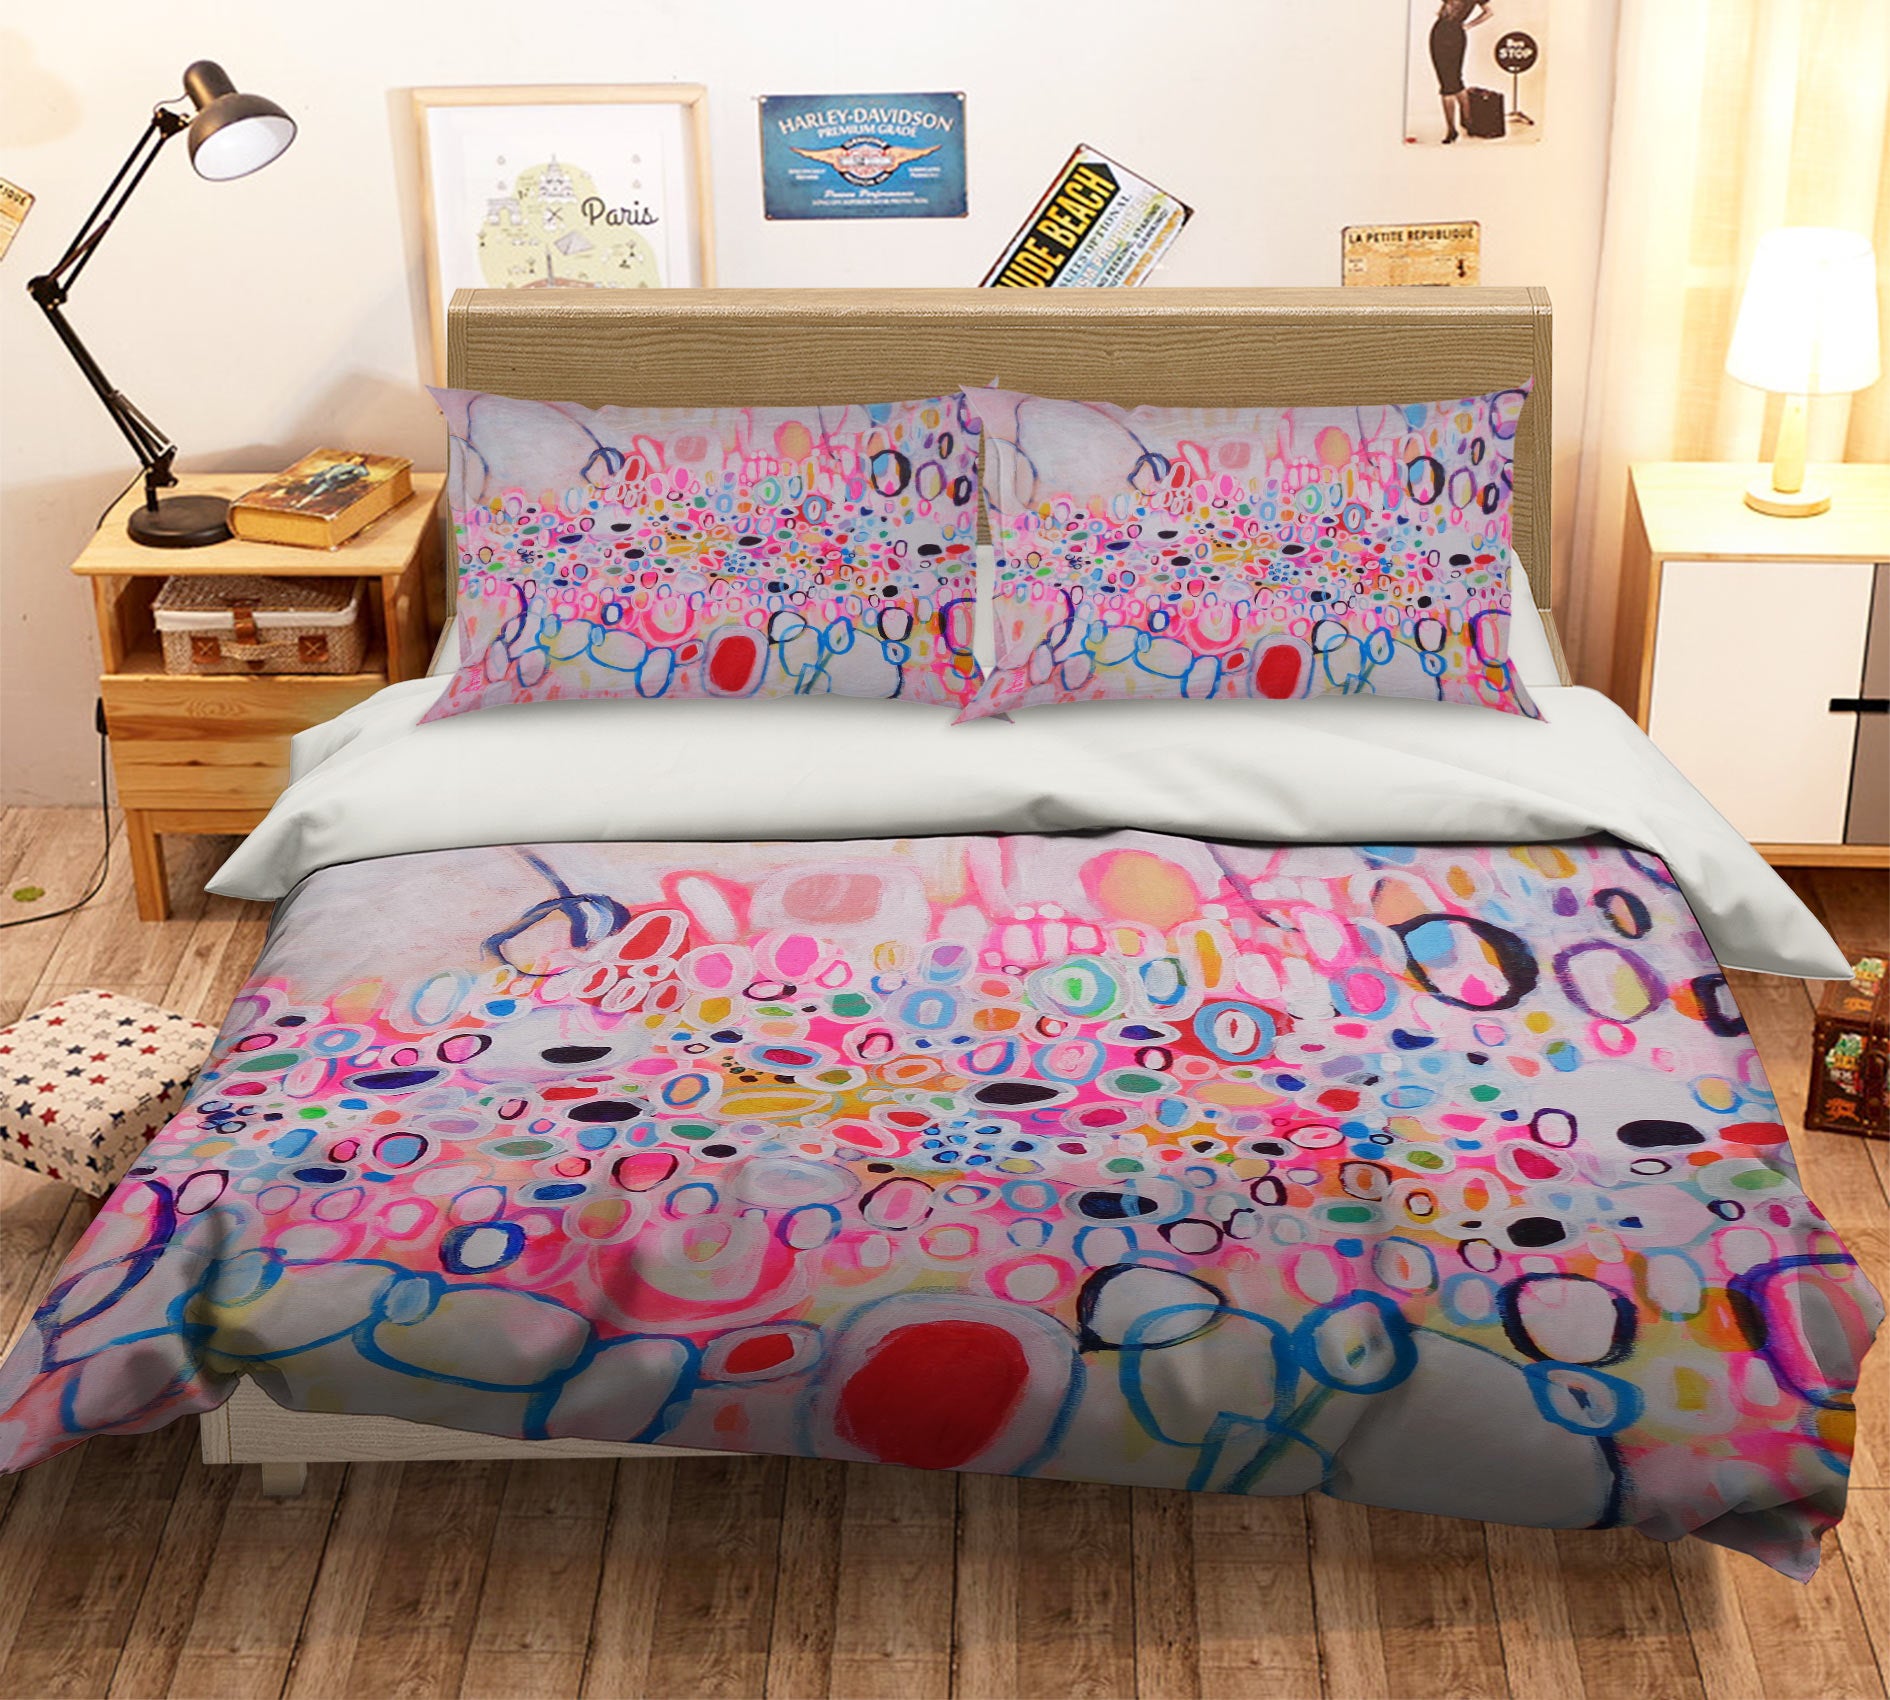 3D Colorful Circle 1217 Misako Chida Bedding Bed Pillowcases Quilt Cover Duvet Cover